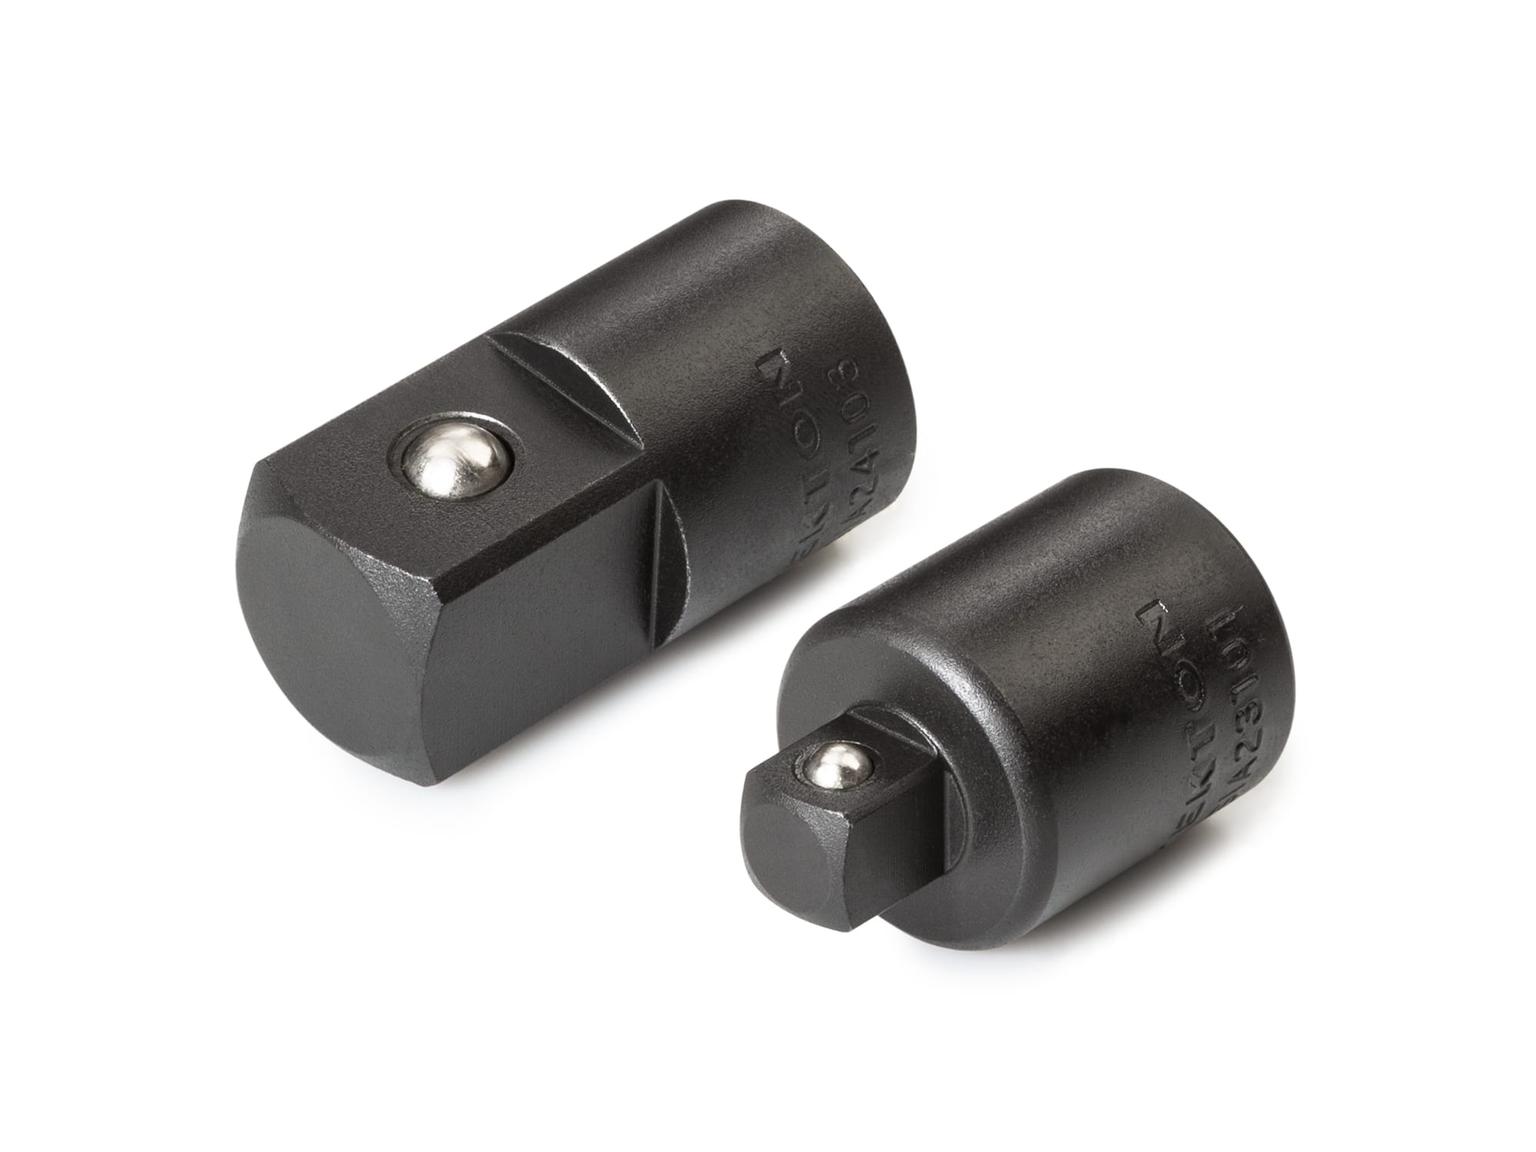 1/2 Inch Drive Impact Adapter/Reducer Set (2-Piece)